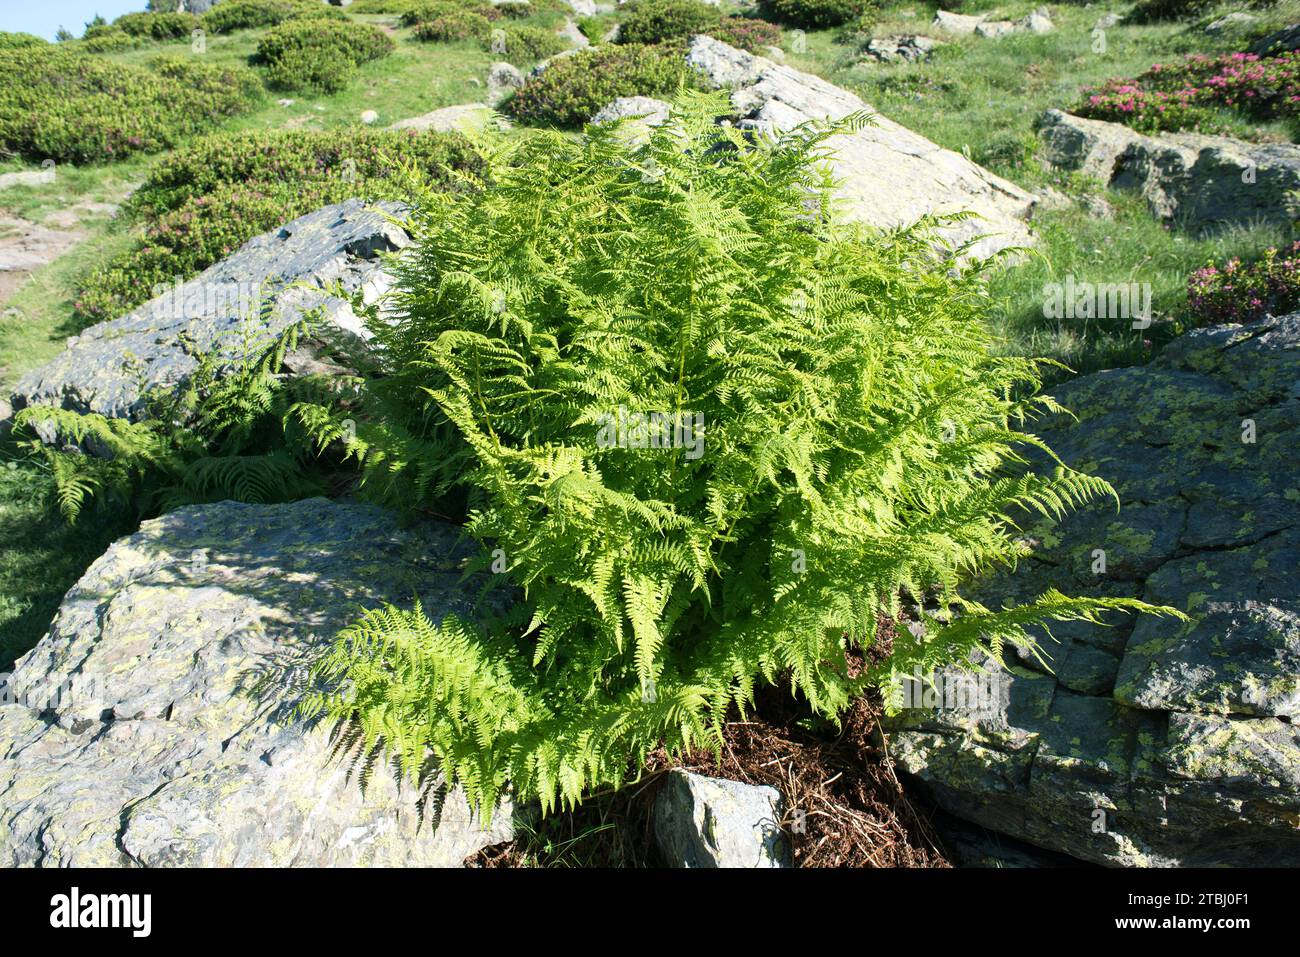 Lady fern (Athyrium filix-femina) is a fern native to Northern Hemisphere. At the bottom Rhododendron ferrugineum. This photo was taken in Andorra. Stock Photo